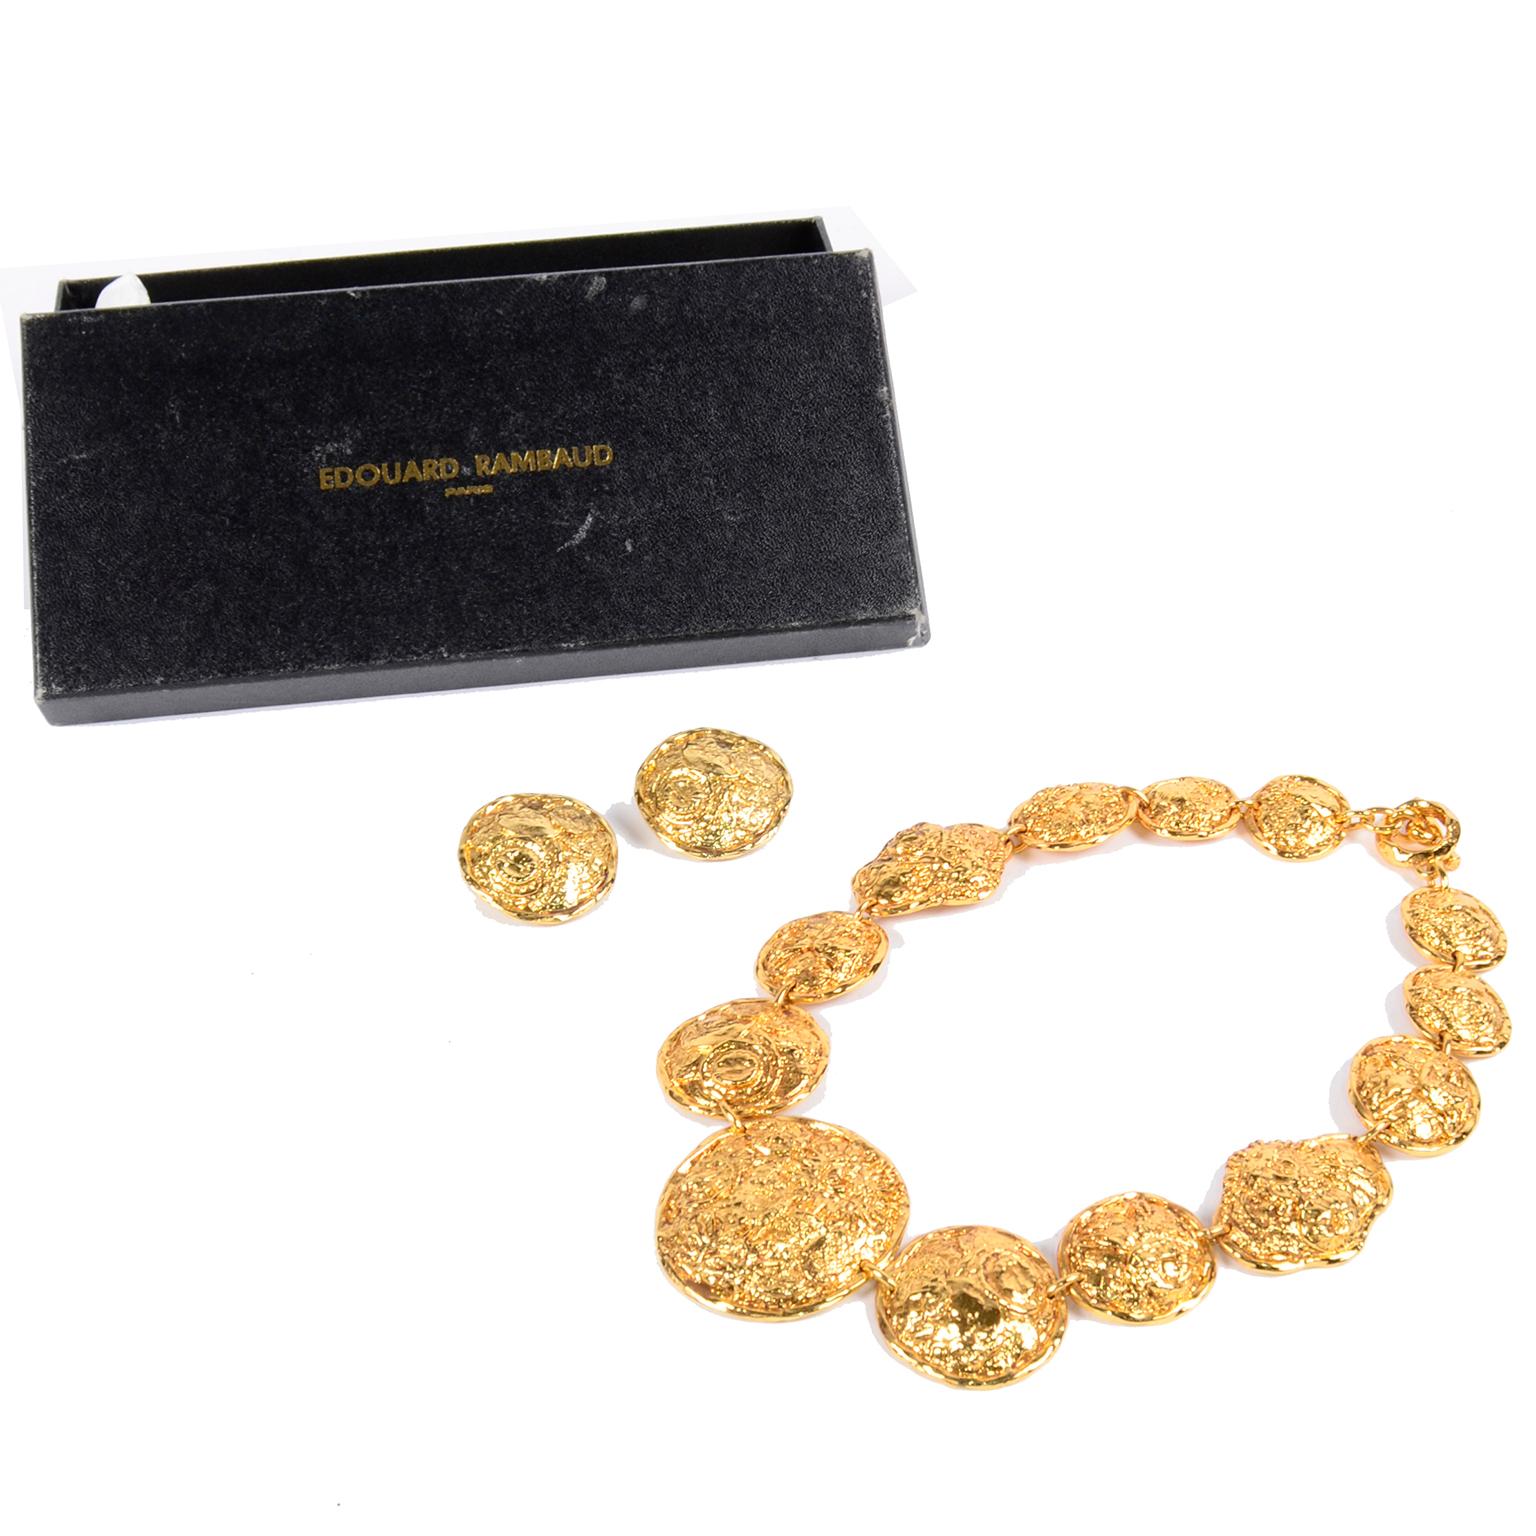 Edouard Rambaud Vintage Gold Tone Textured Statement Necklace & Earrings w Box 4